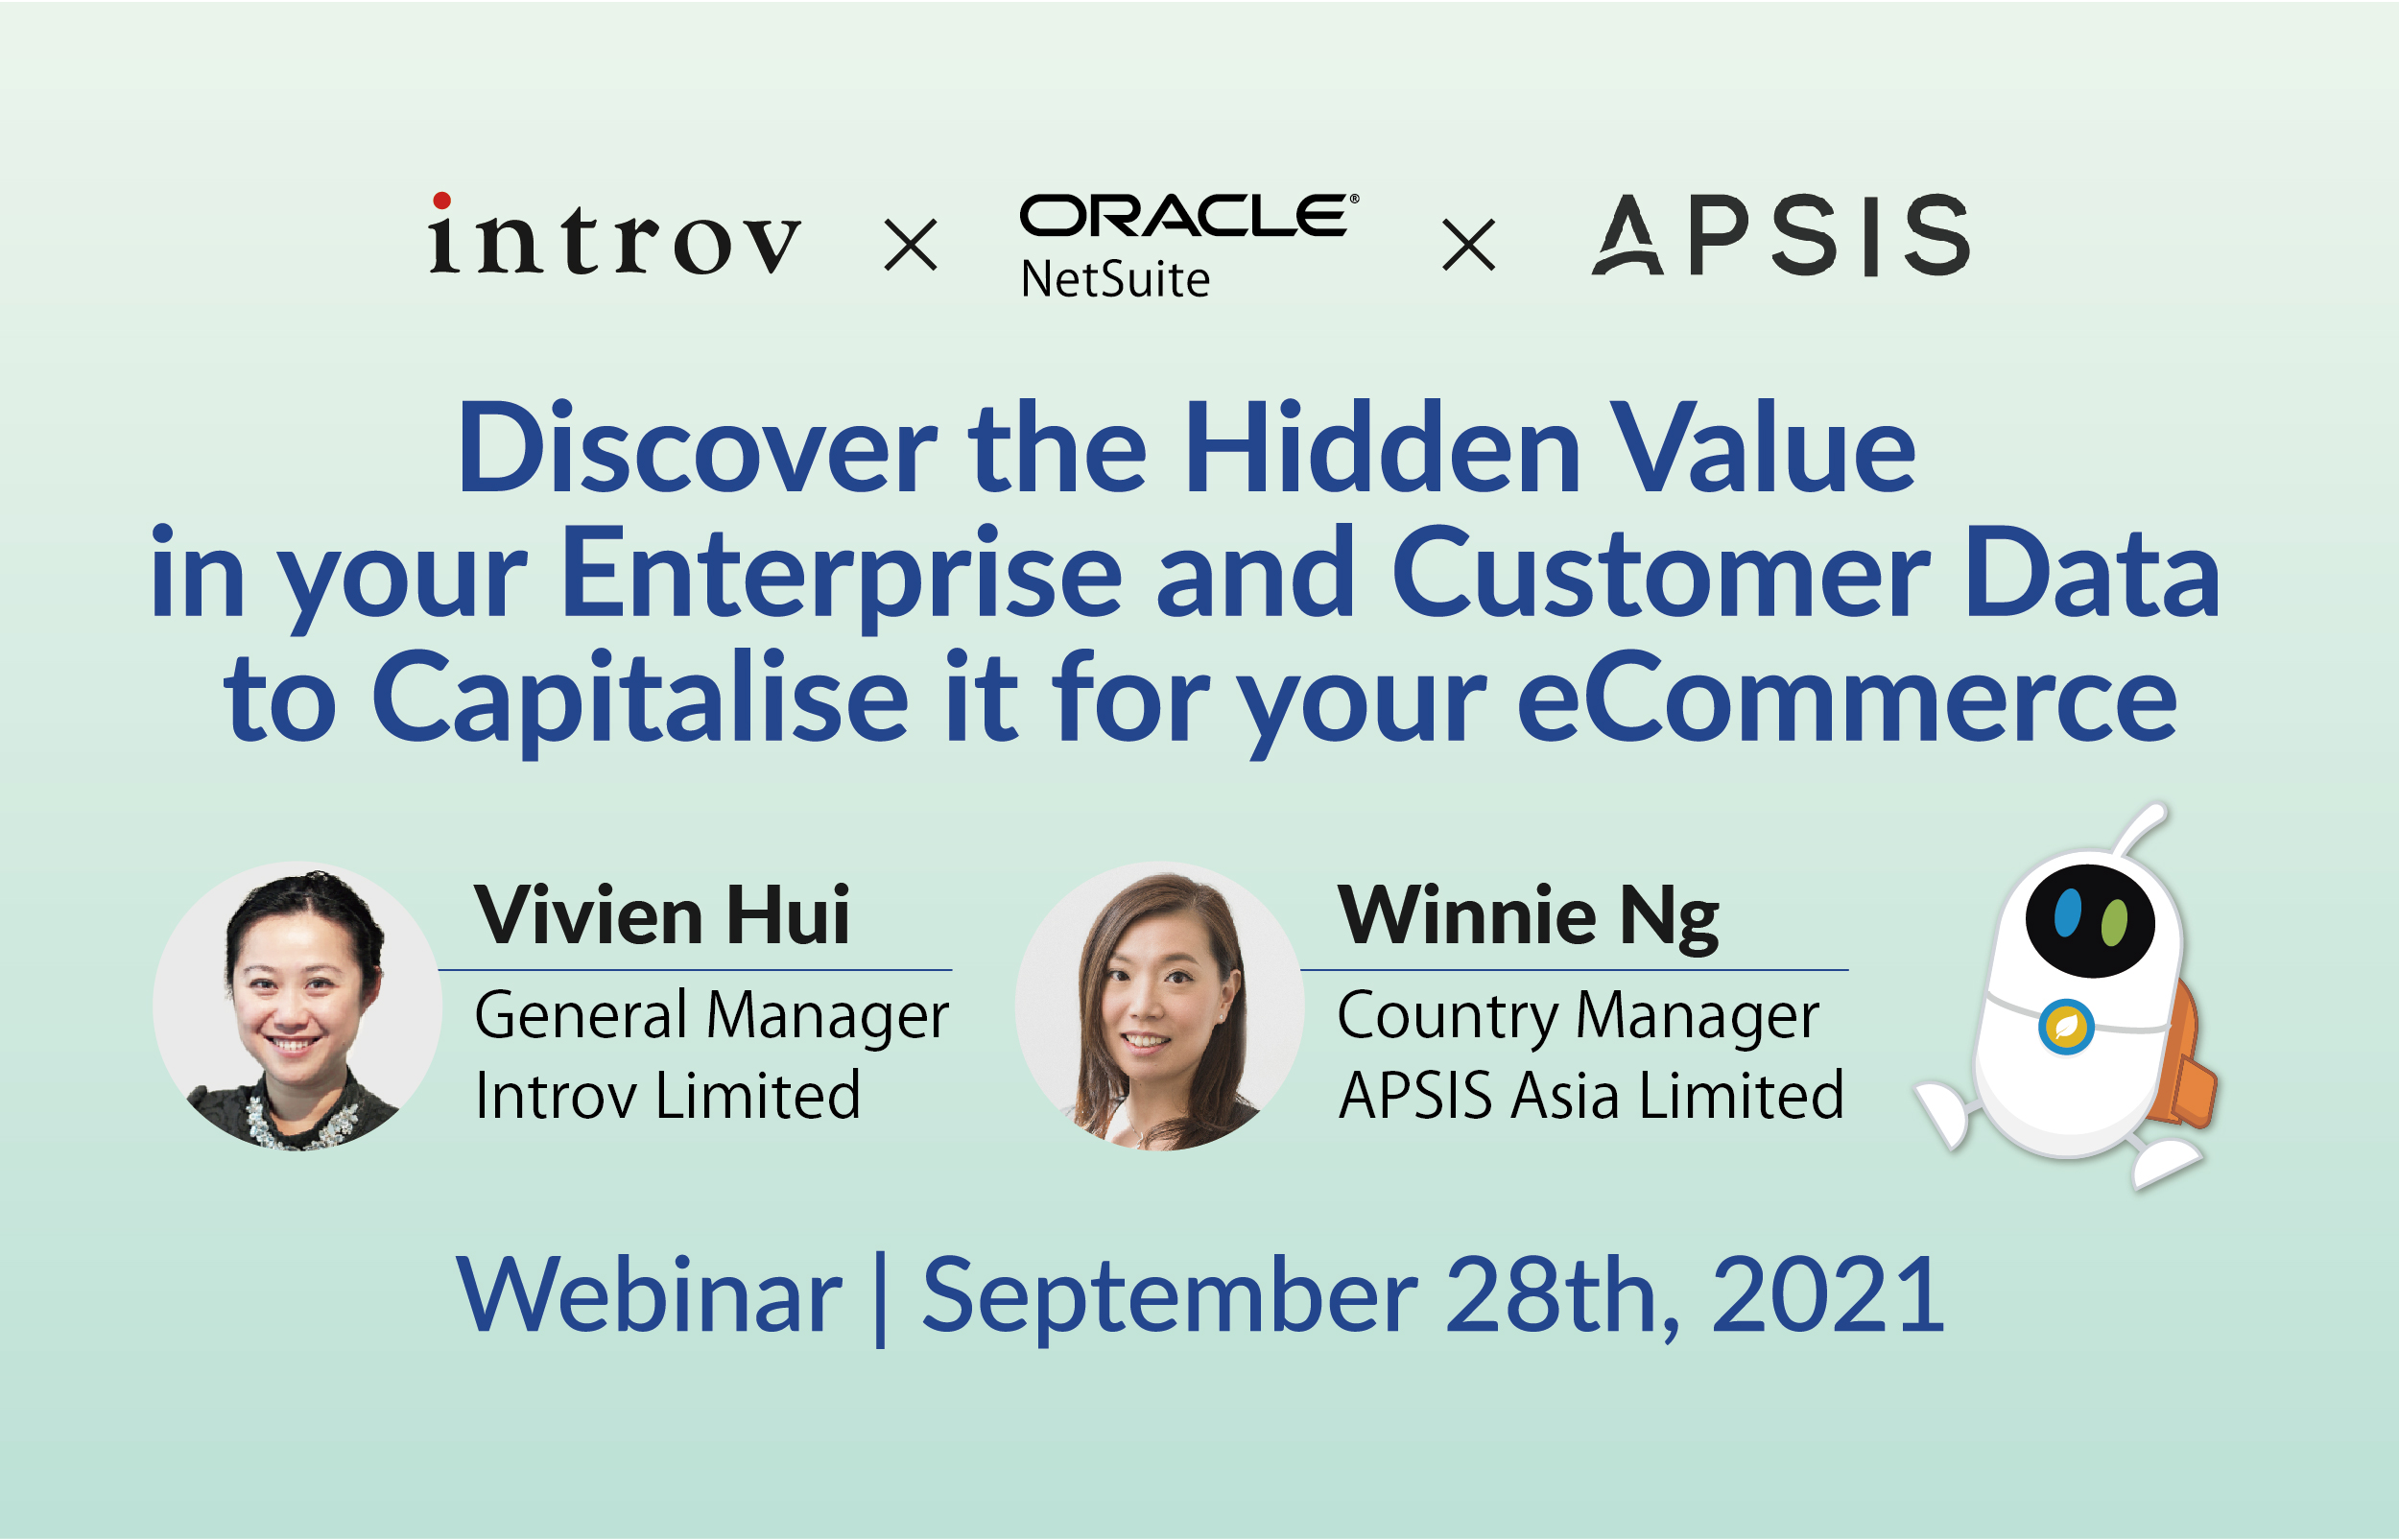 Webinar: Discover the Hidden Value in your Enterprise and Customer Data to Capitalise it for your eCommerce (September 28th, 2021)